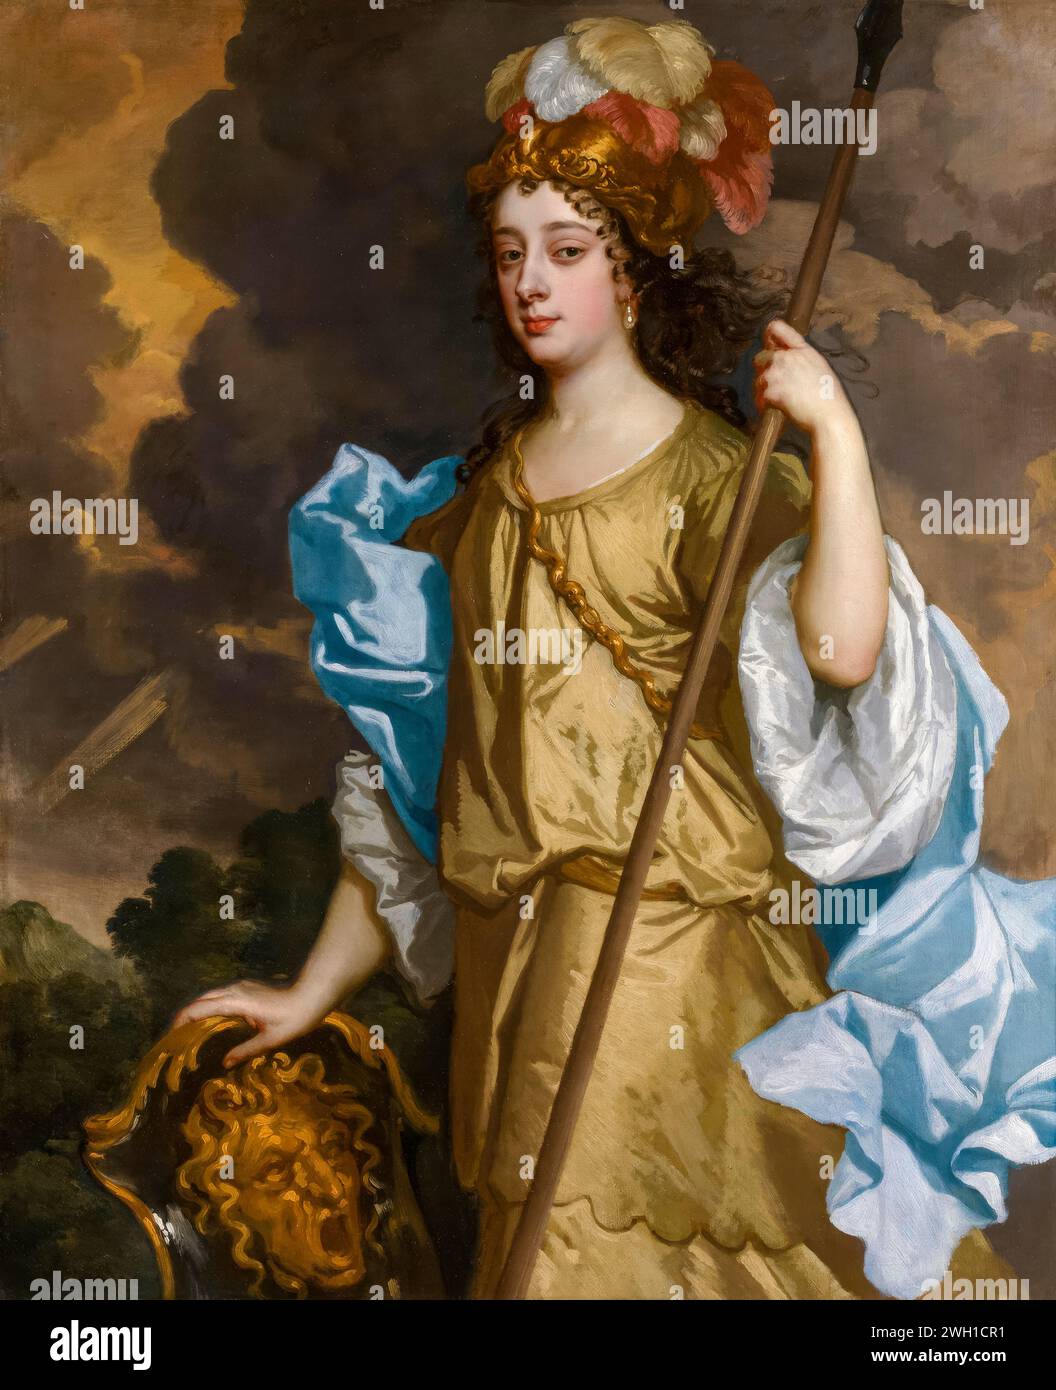 Barbara Palmer, 1st Duchess of Cleveland (née Barbara Villiers, 1640-1709), English royal mistress of King Charles II of England, as Minerva, portrait painting in oil on canvas by Sir Peter Lely, circa 1665 Stock Photo